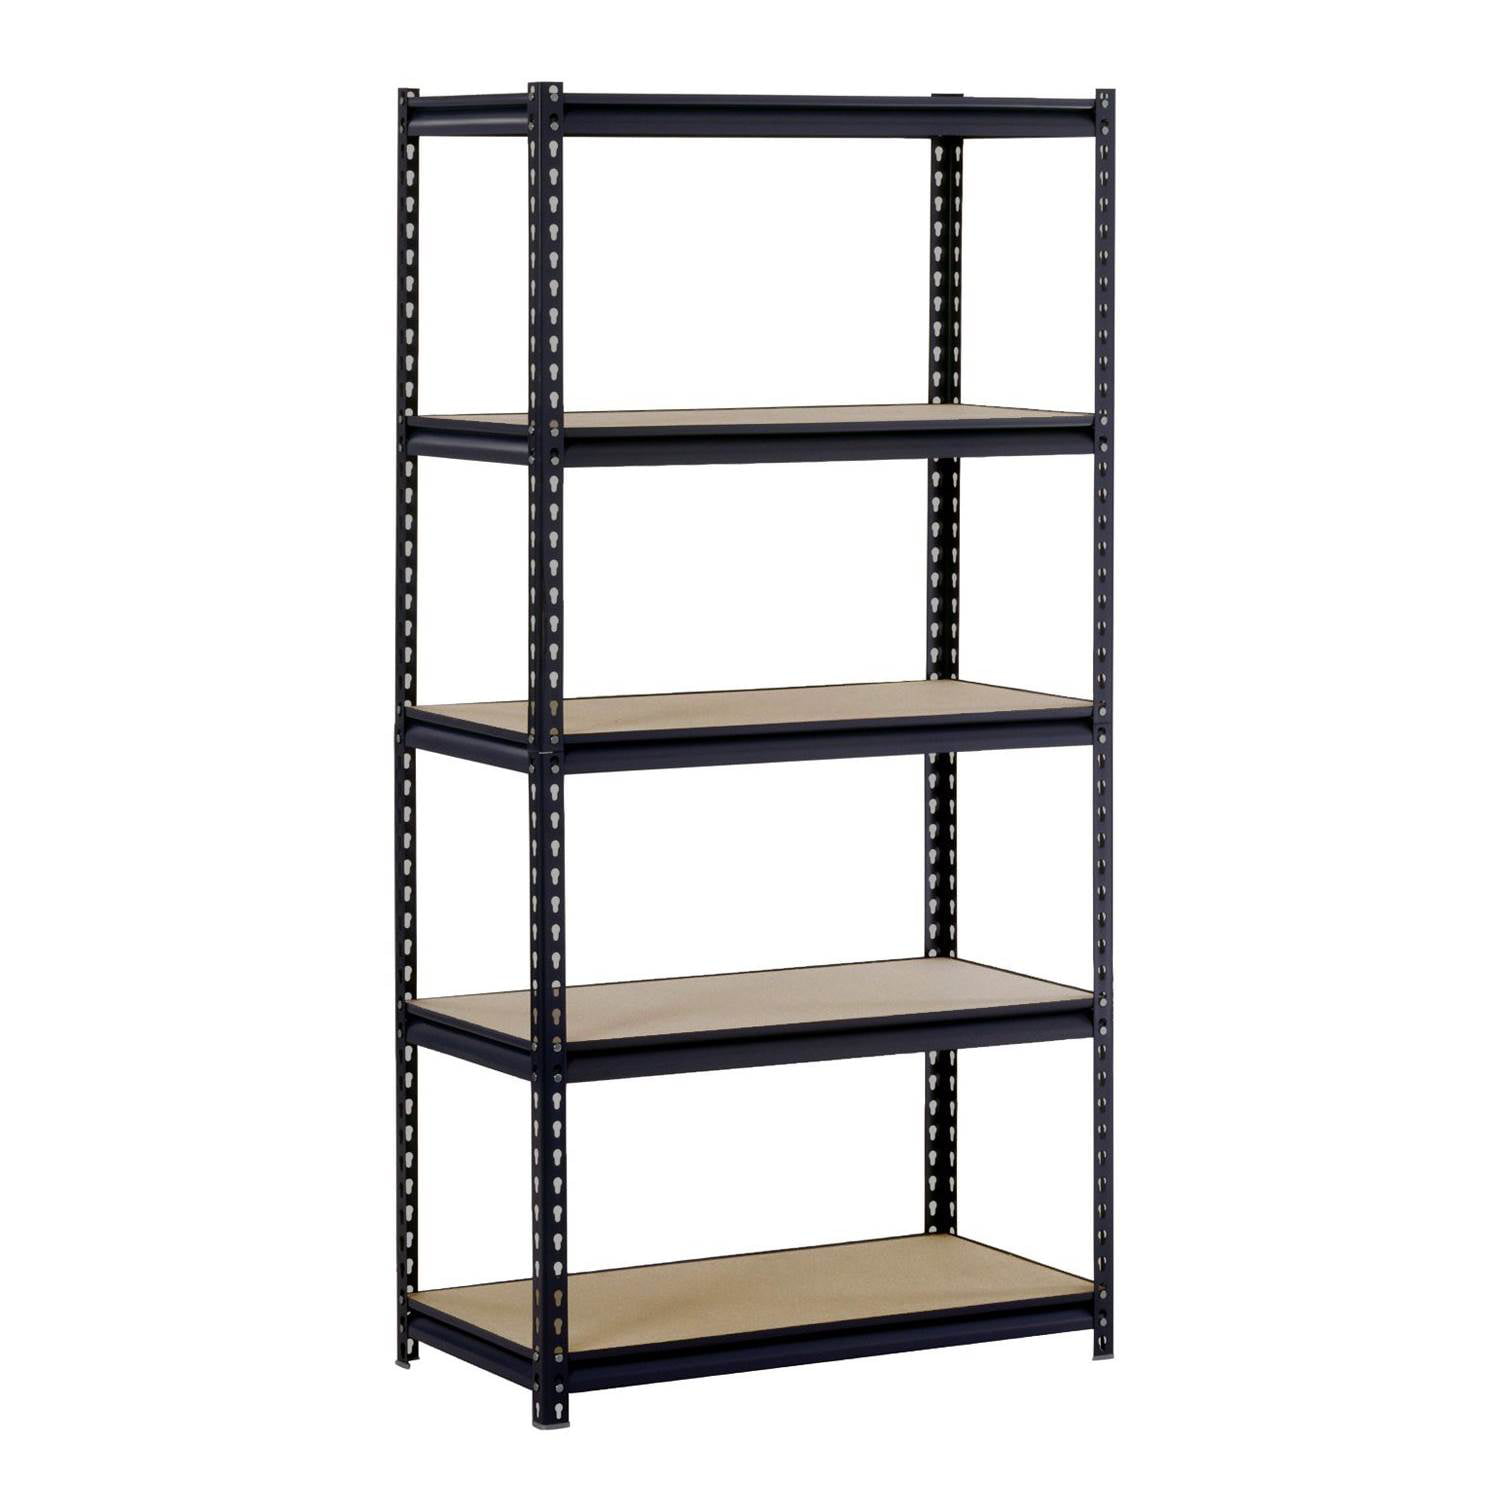 No TAX No tools required for assembly Muscle Rack 4-Level Shoe Rack-Black 